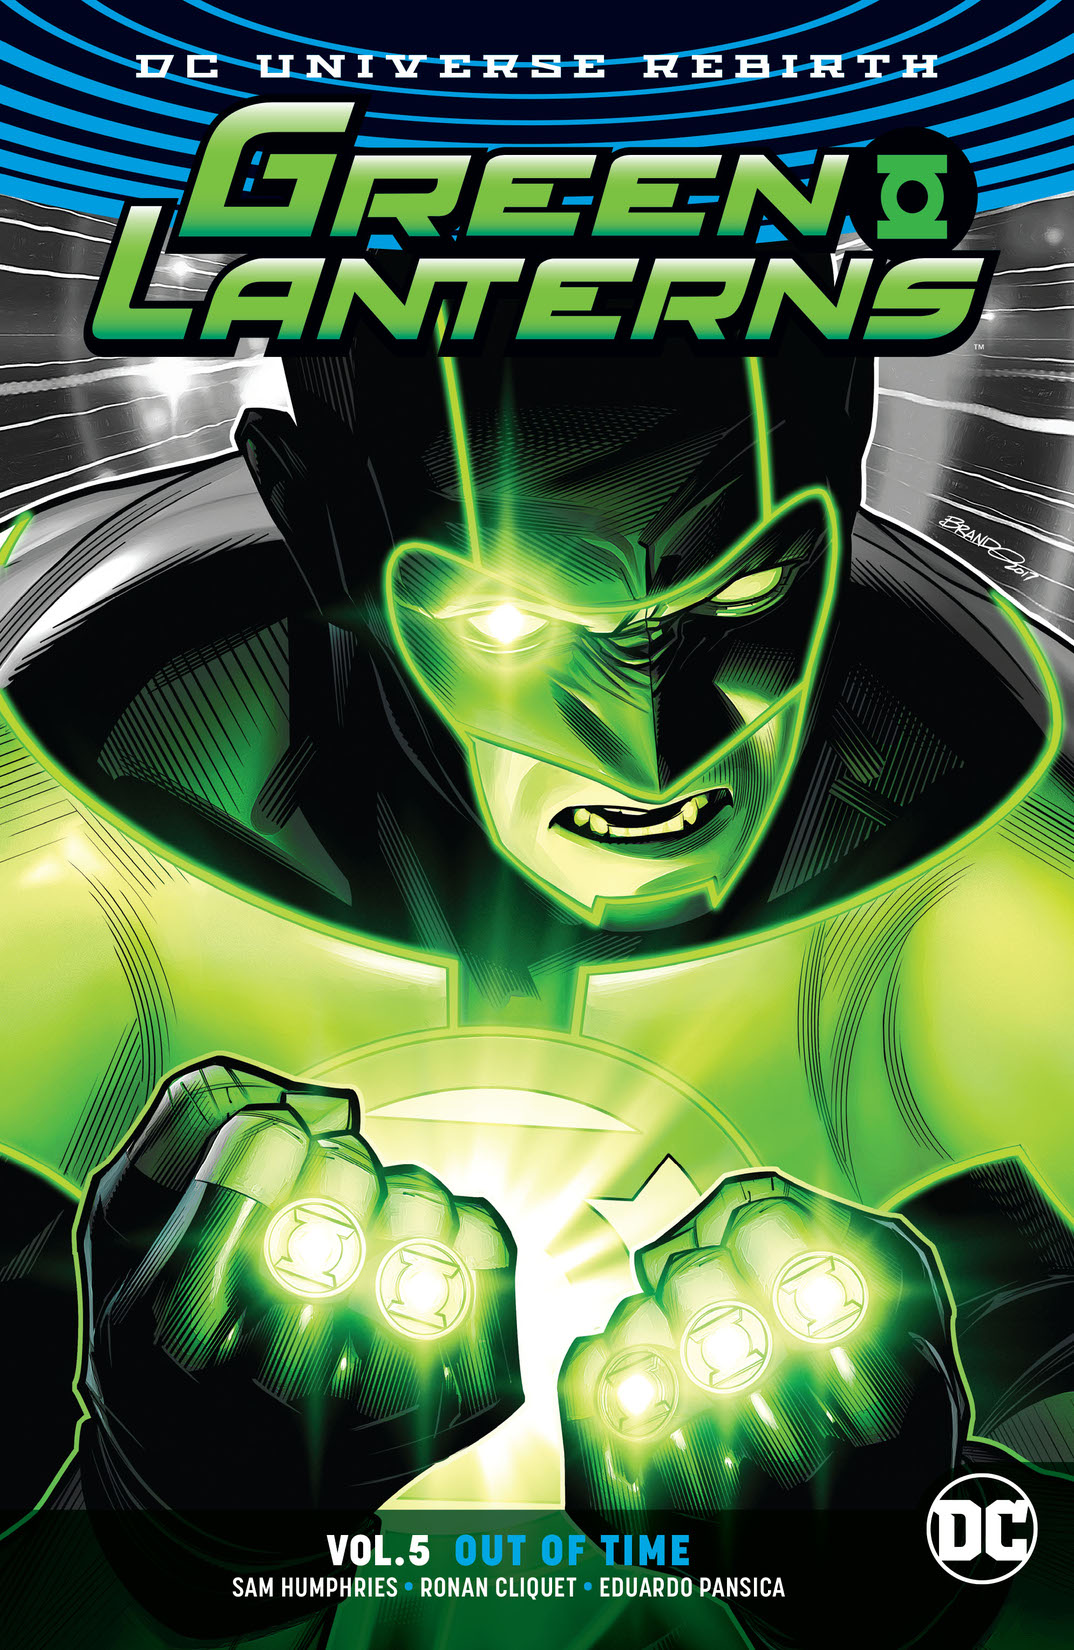 Green Lanterns Vol. 5: Out of Time  preview images